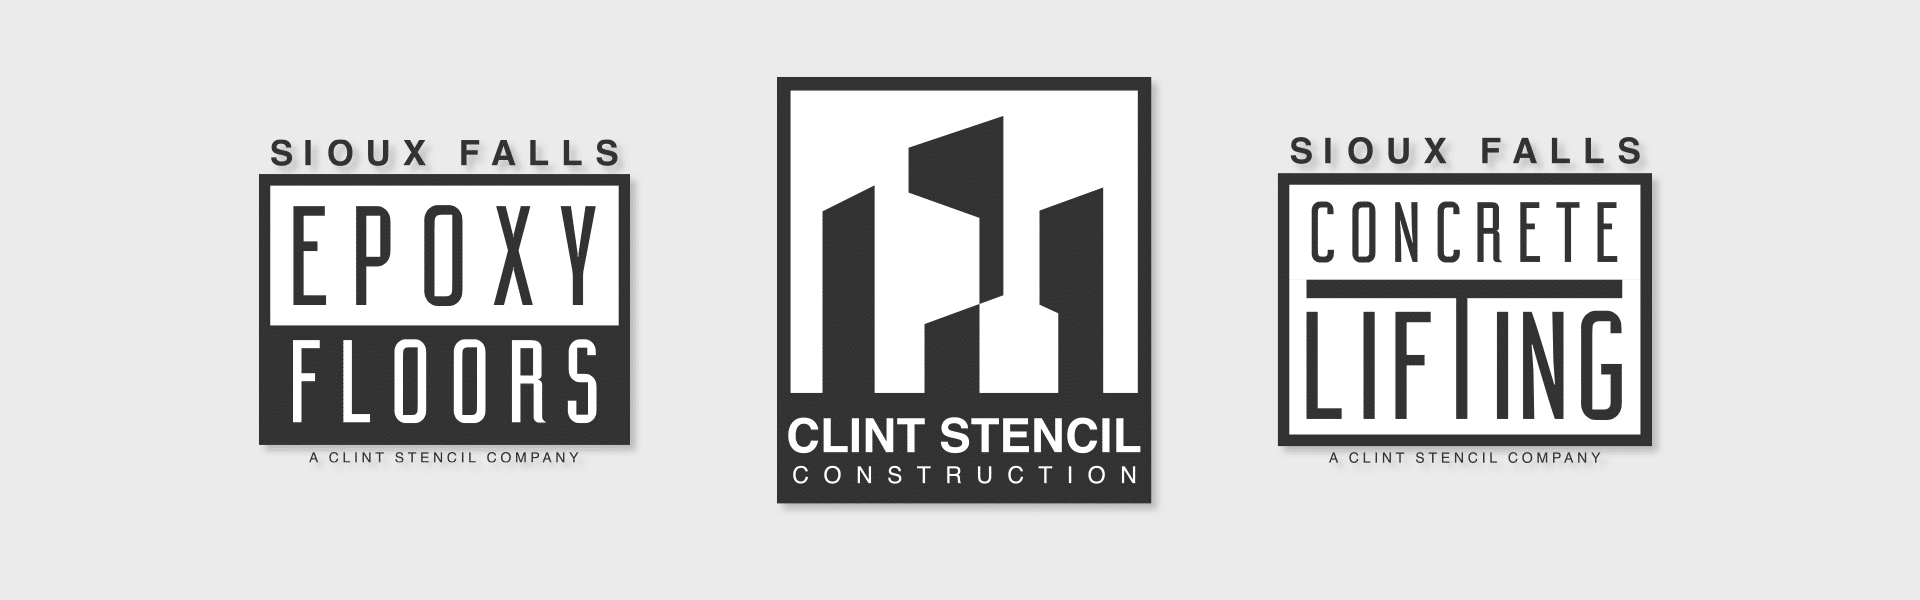 An abstract logo for the Clint Stencil Construction company in the Sioux Fall, SD area.